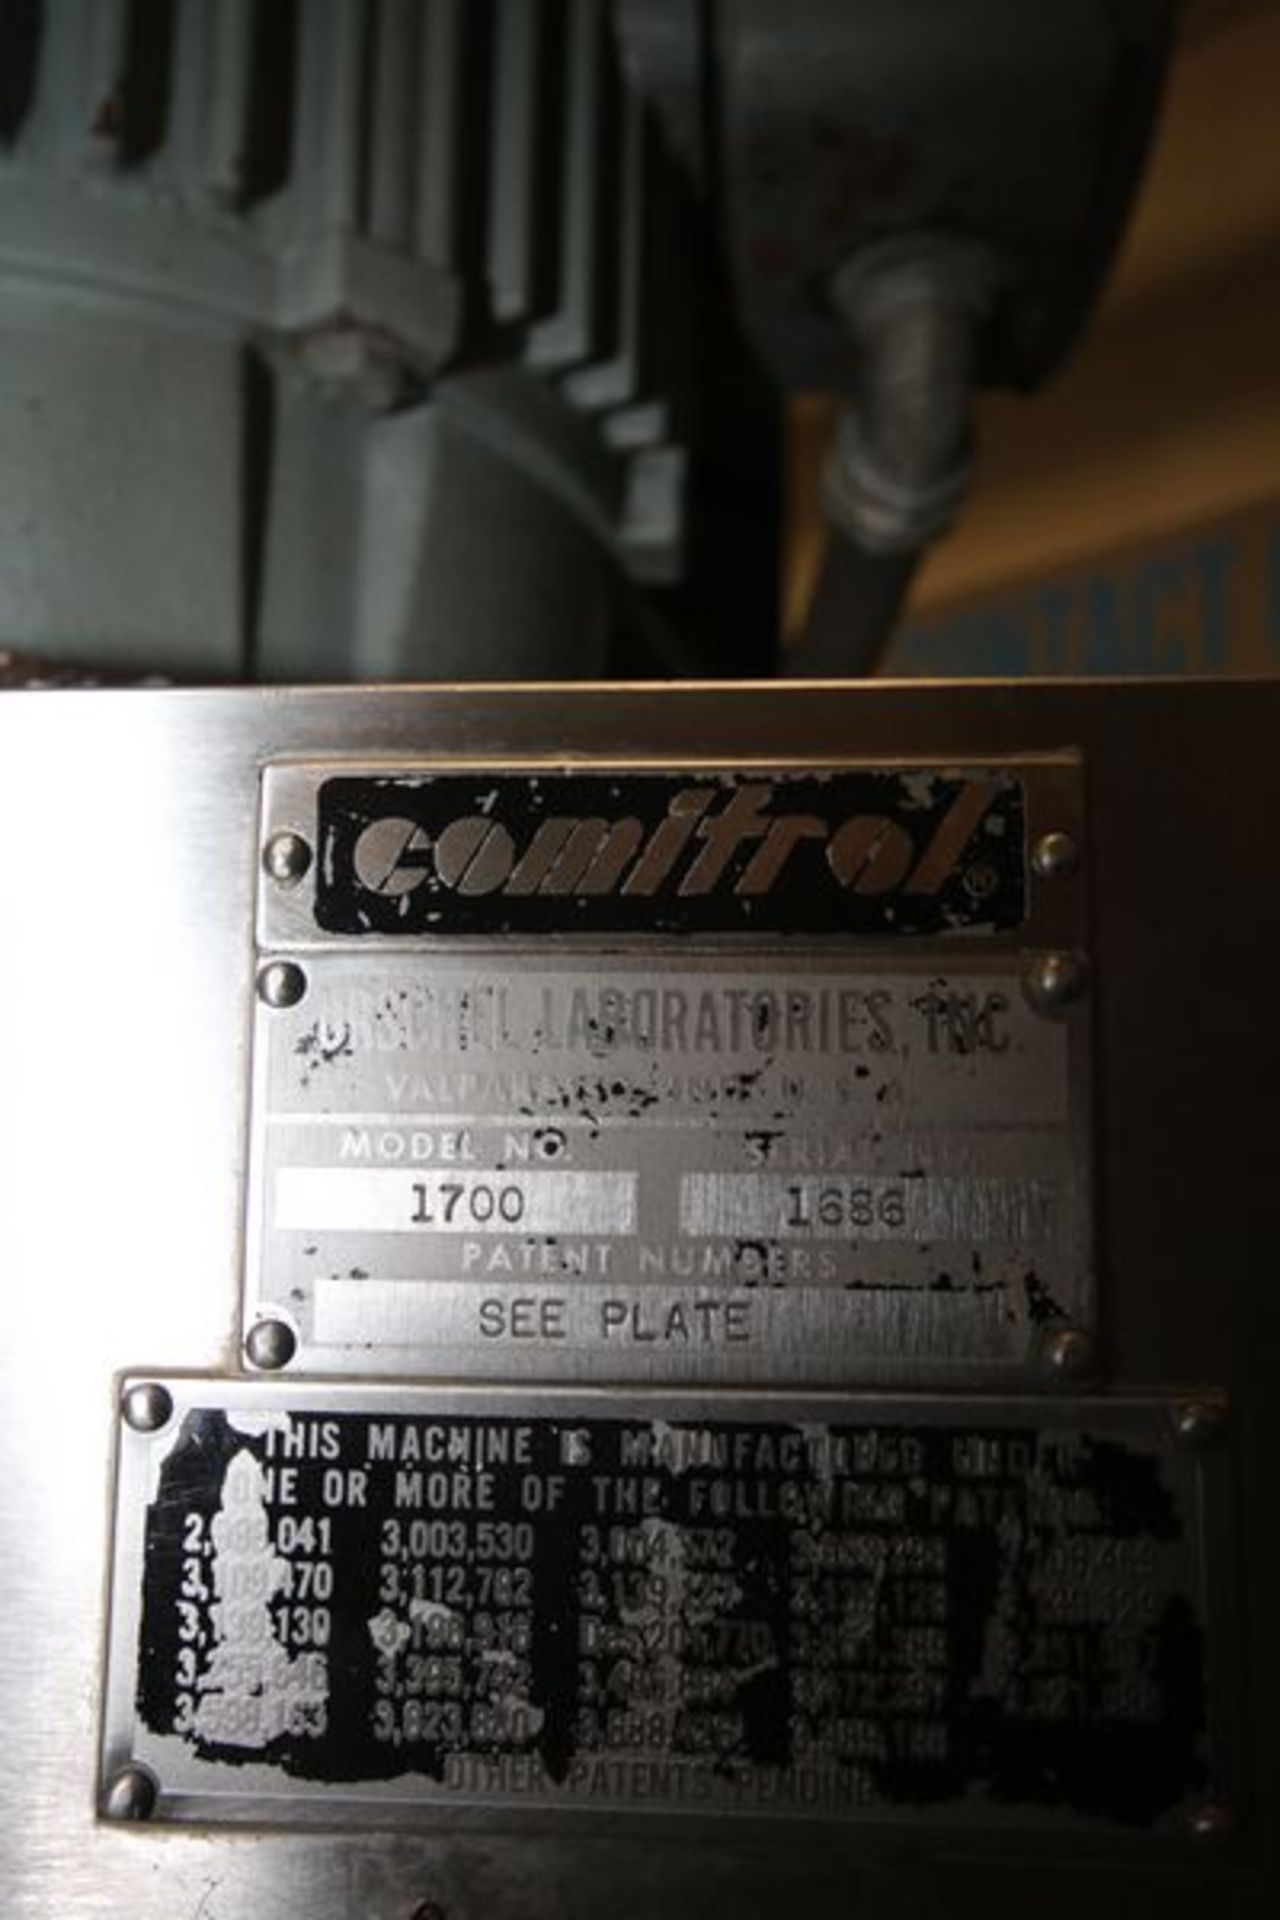 Urschel Comtrol Shredder, Model 1700, S/N 1686, Equipped with Pacemaker 30 HP, 3545 RPM, 230/460, - Image 4 of 4